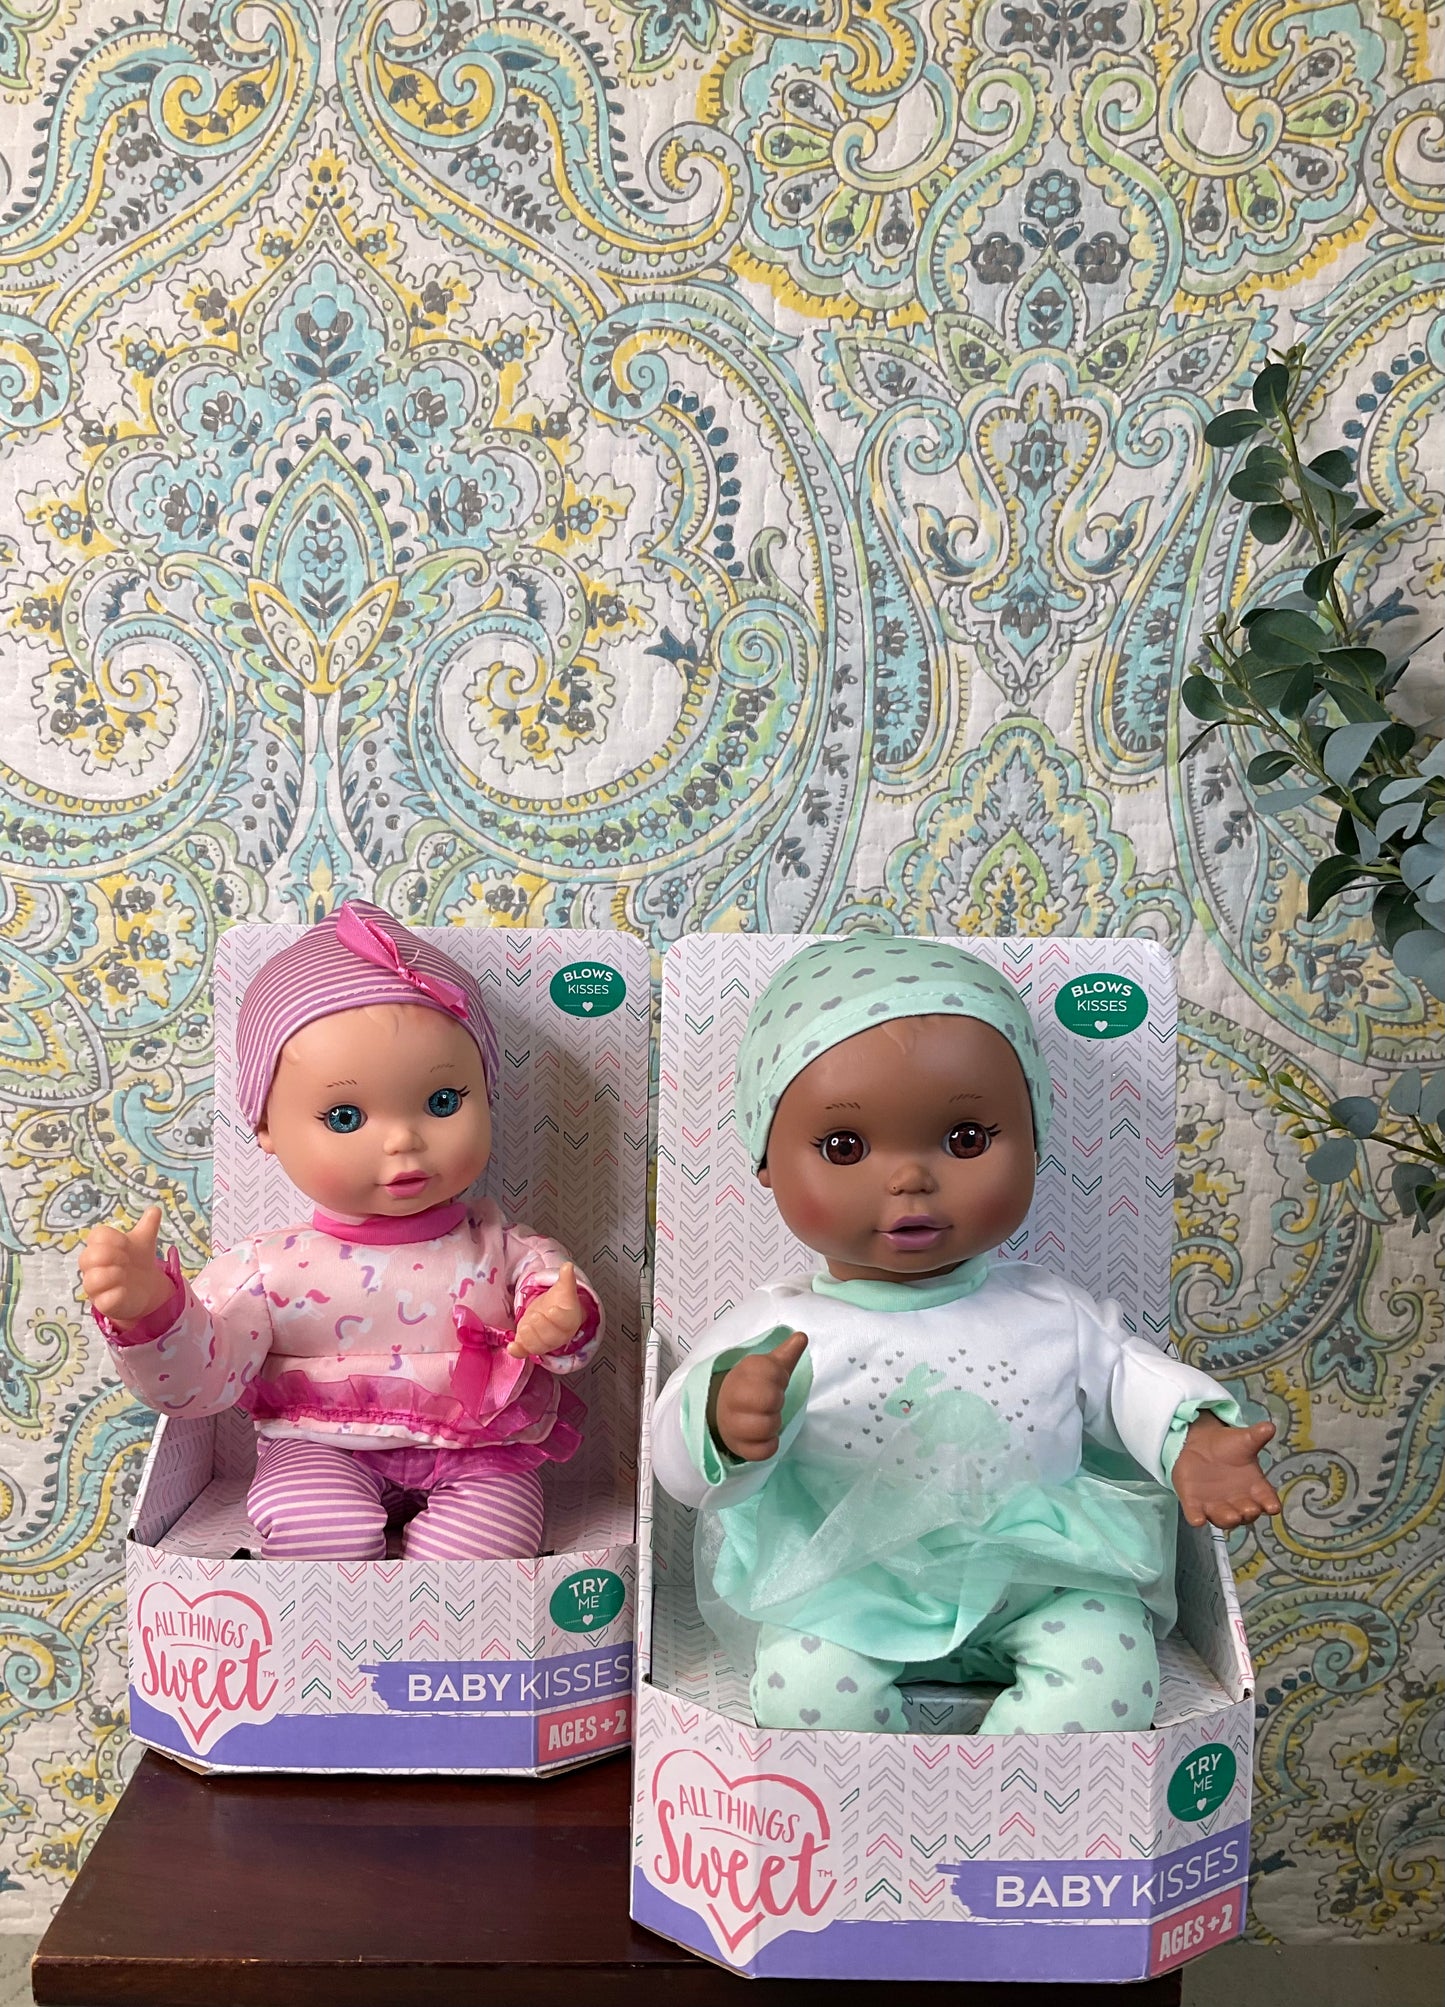 All Things Sweet Baby Kisses Dolls, Sold Separately